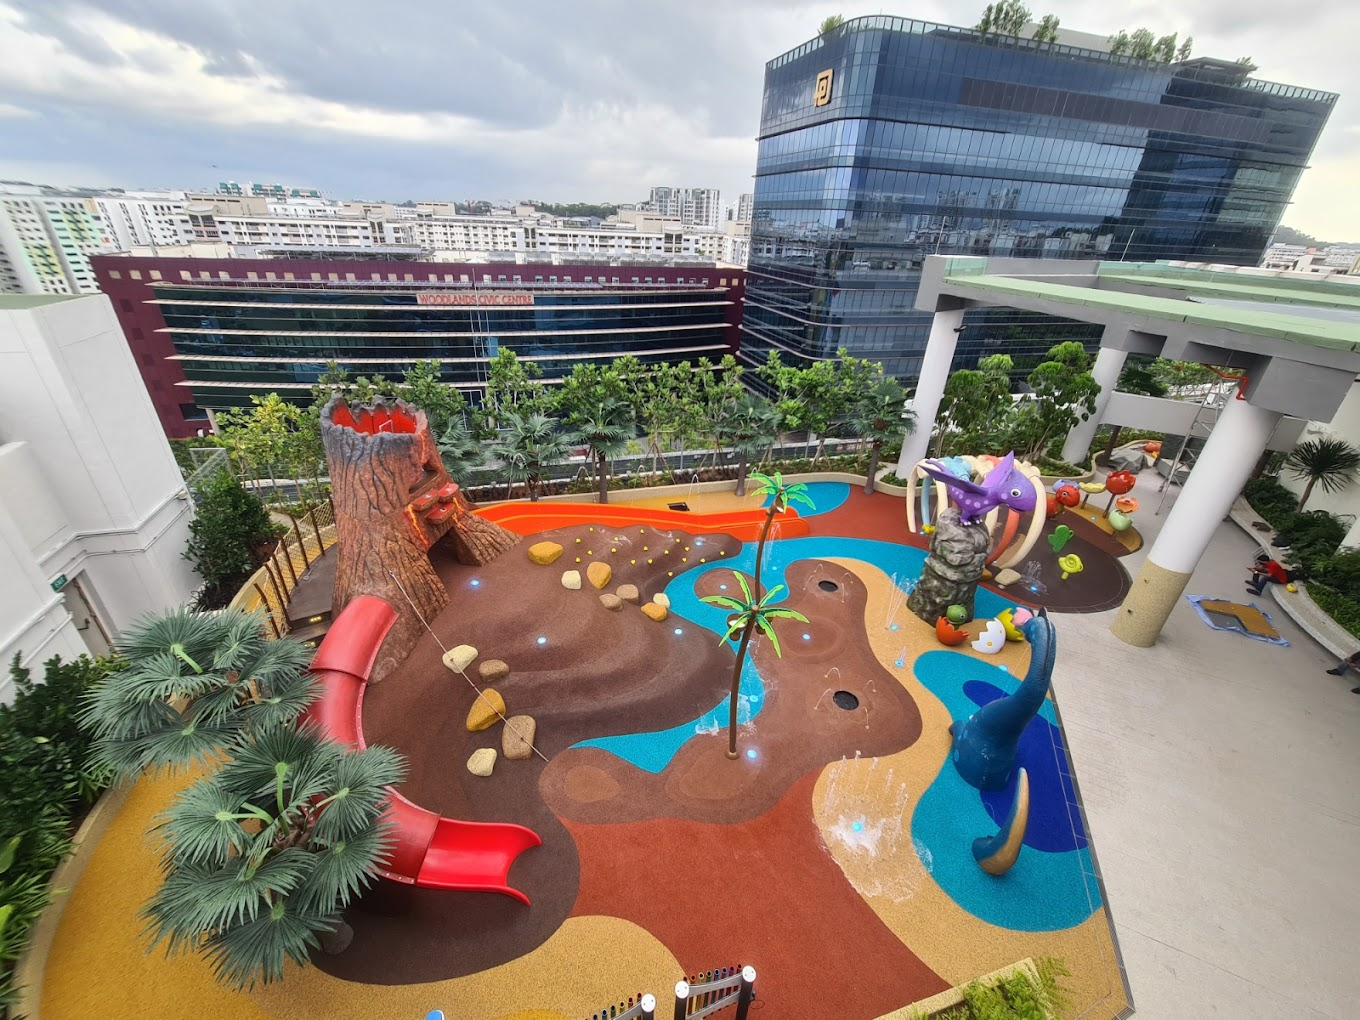 Water play zone adorned with dinosaur elements and a slide with a volcanic entrance, adjacent to Cantine by Kopitiam.